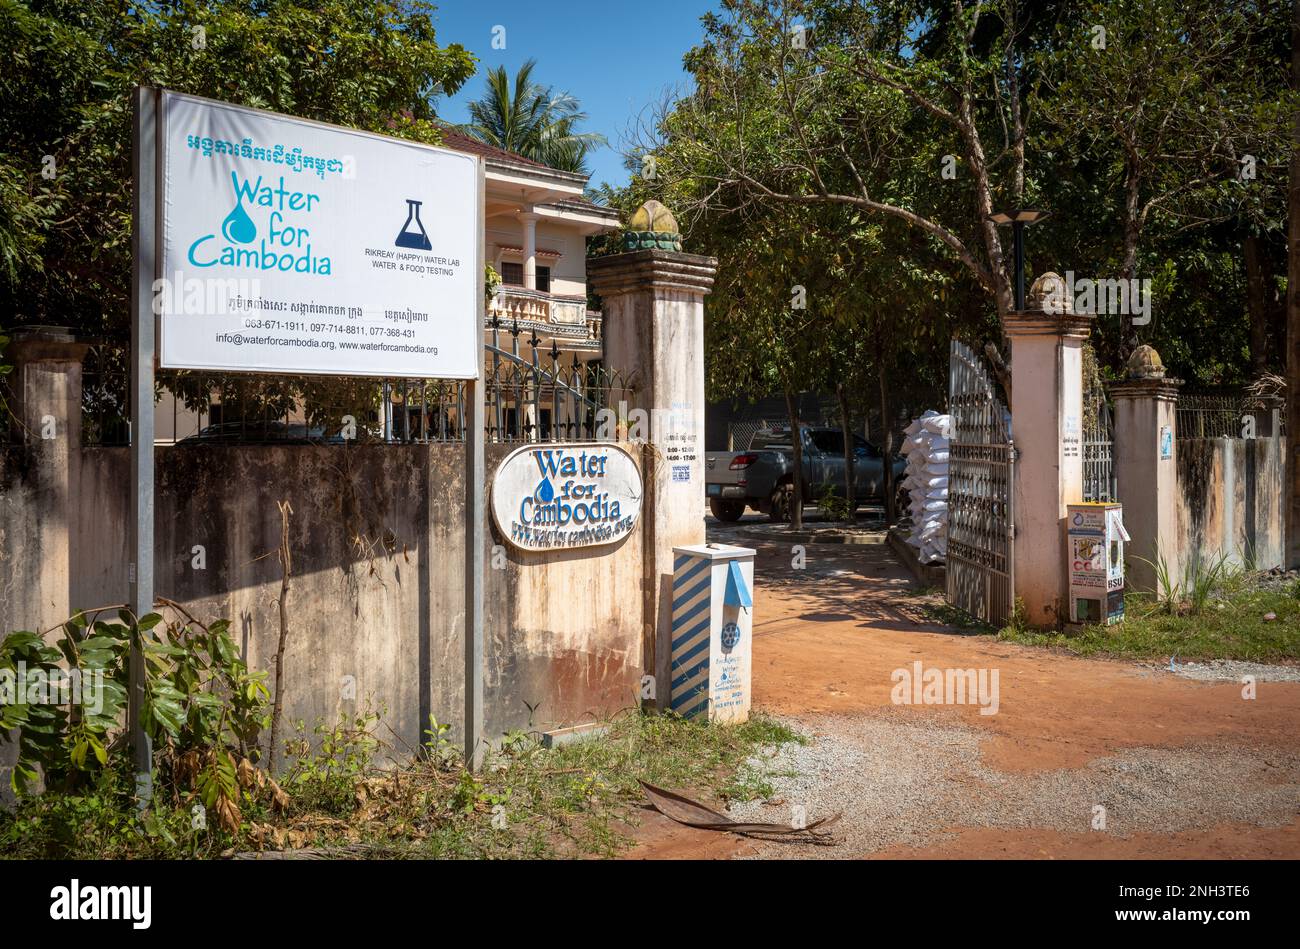 The entrance to the offices, laboratory and workshop for non-governmental charity organisation Water for Cambodia in Siem Reap, Cambodia. Stock Photo